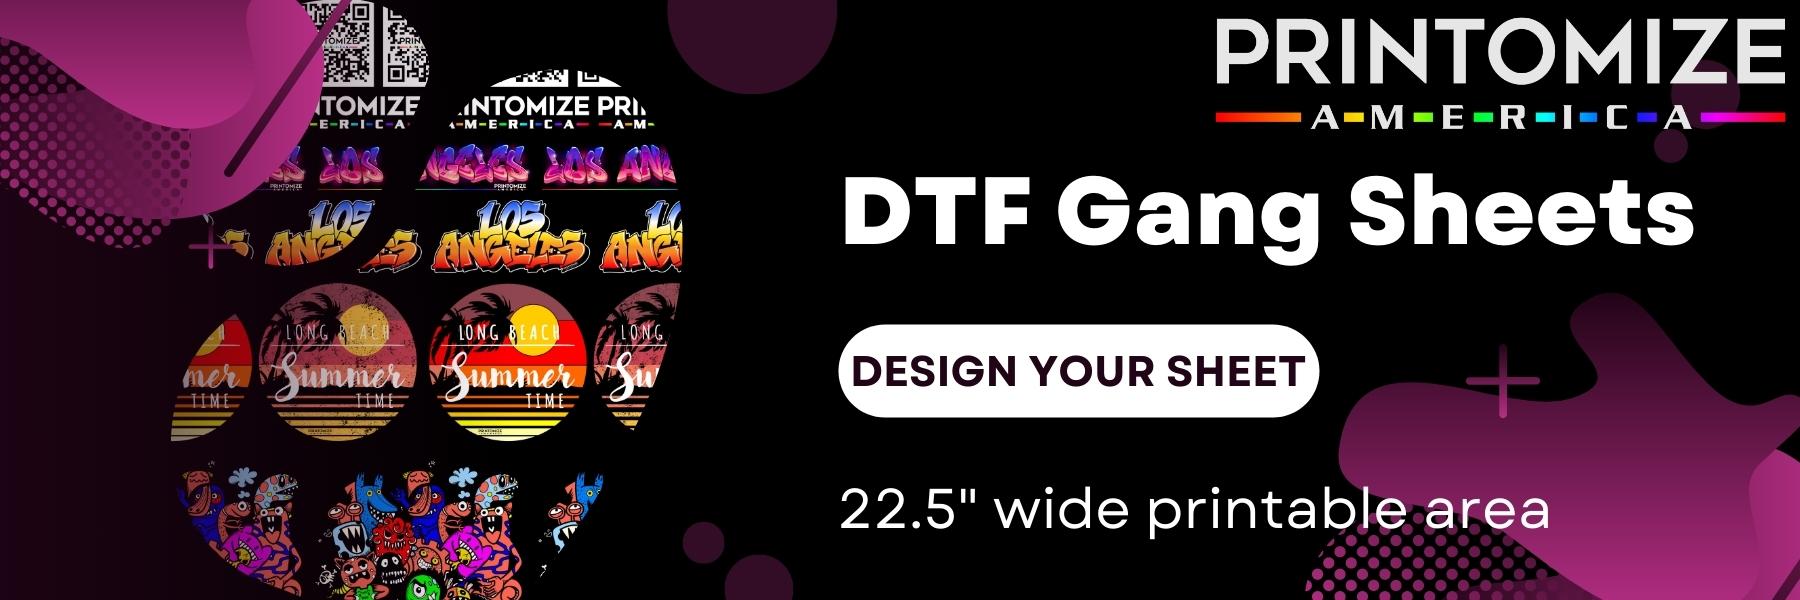 Order Your DTF Transfer -Printomize America